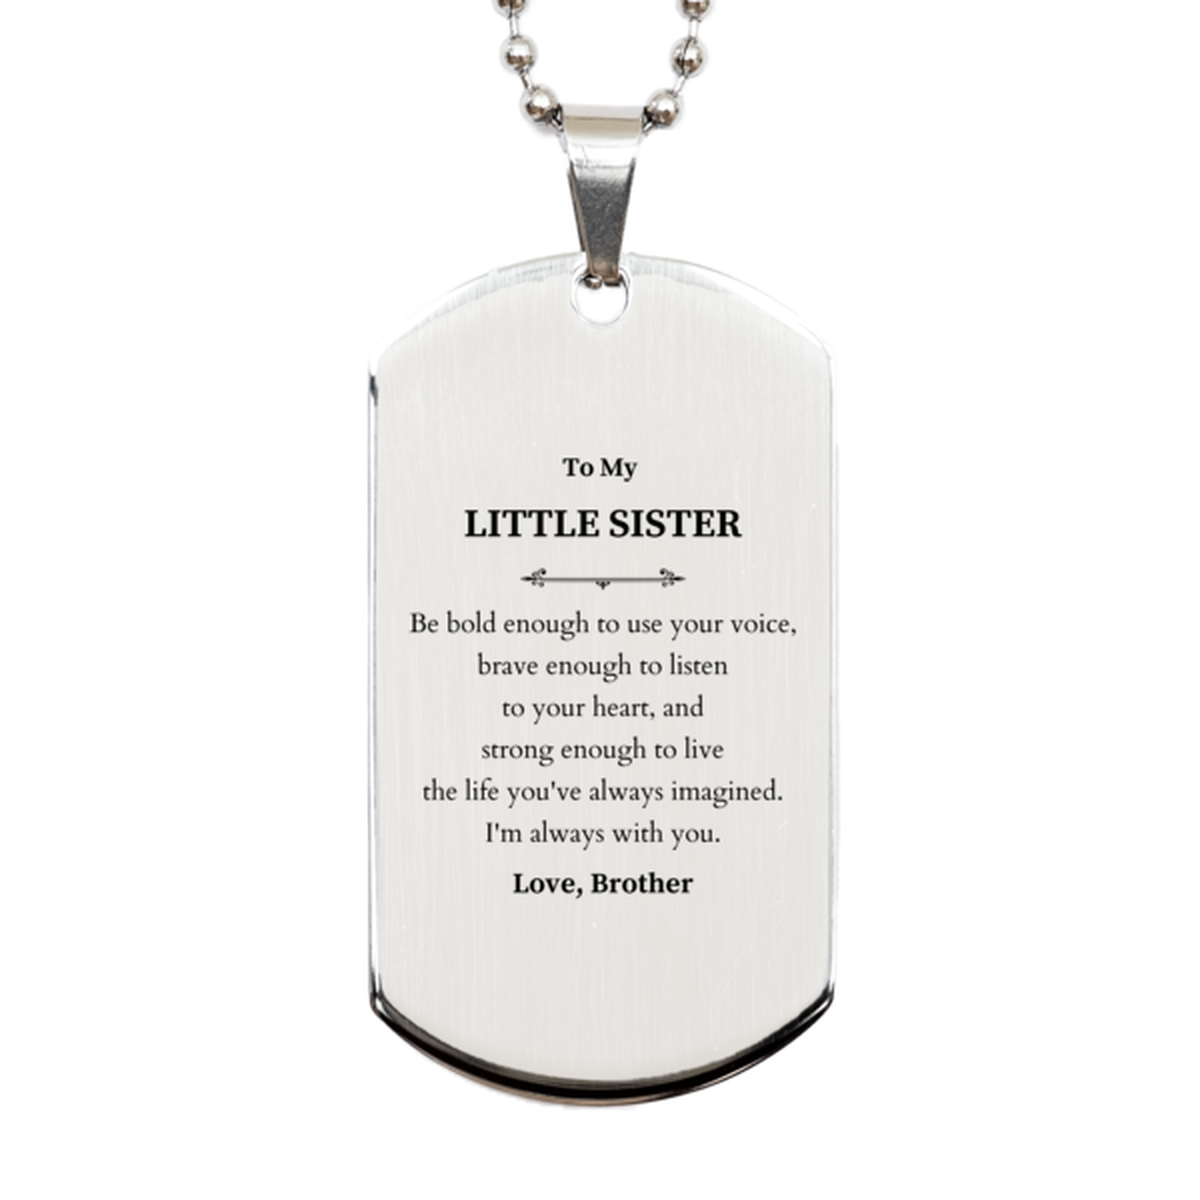 Keepsake Little Sister Silver Dog Tag Gift Idea Graduation Christmas Birthday Little Sister from Brother, Little Sister Be bold enough to use your voice, brave enough to listen to your heart. Love, Brother